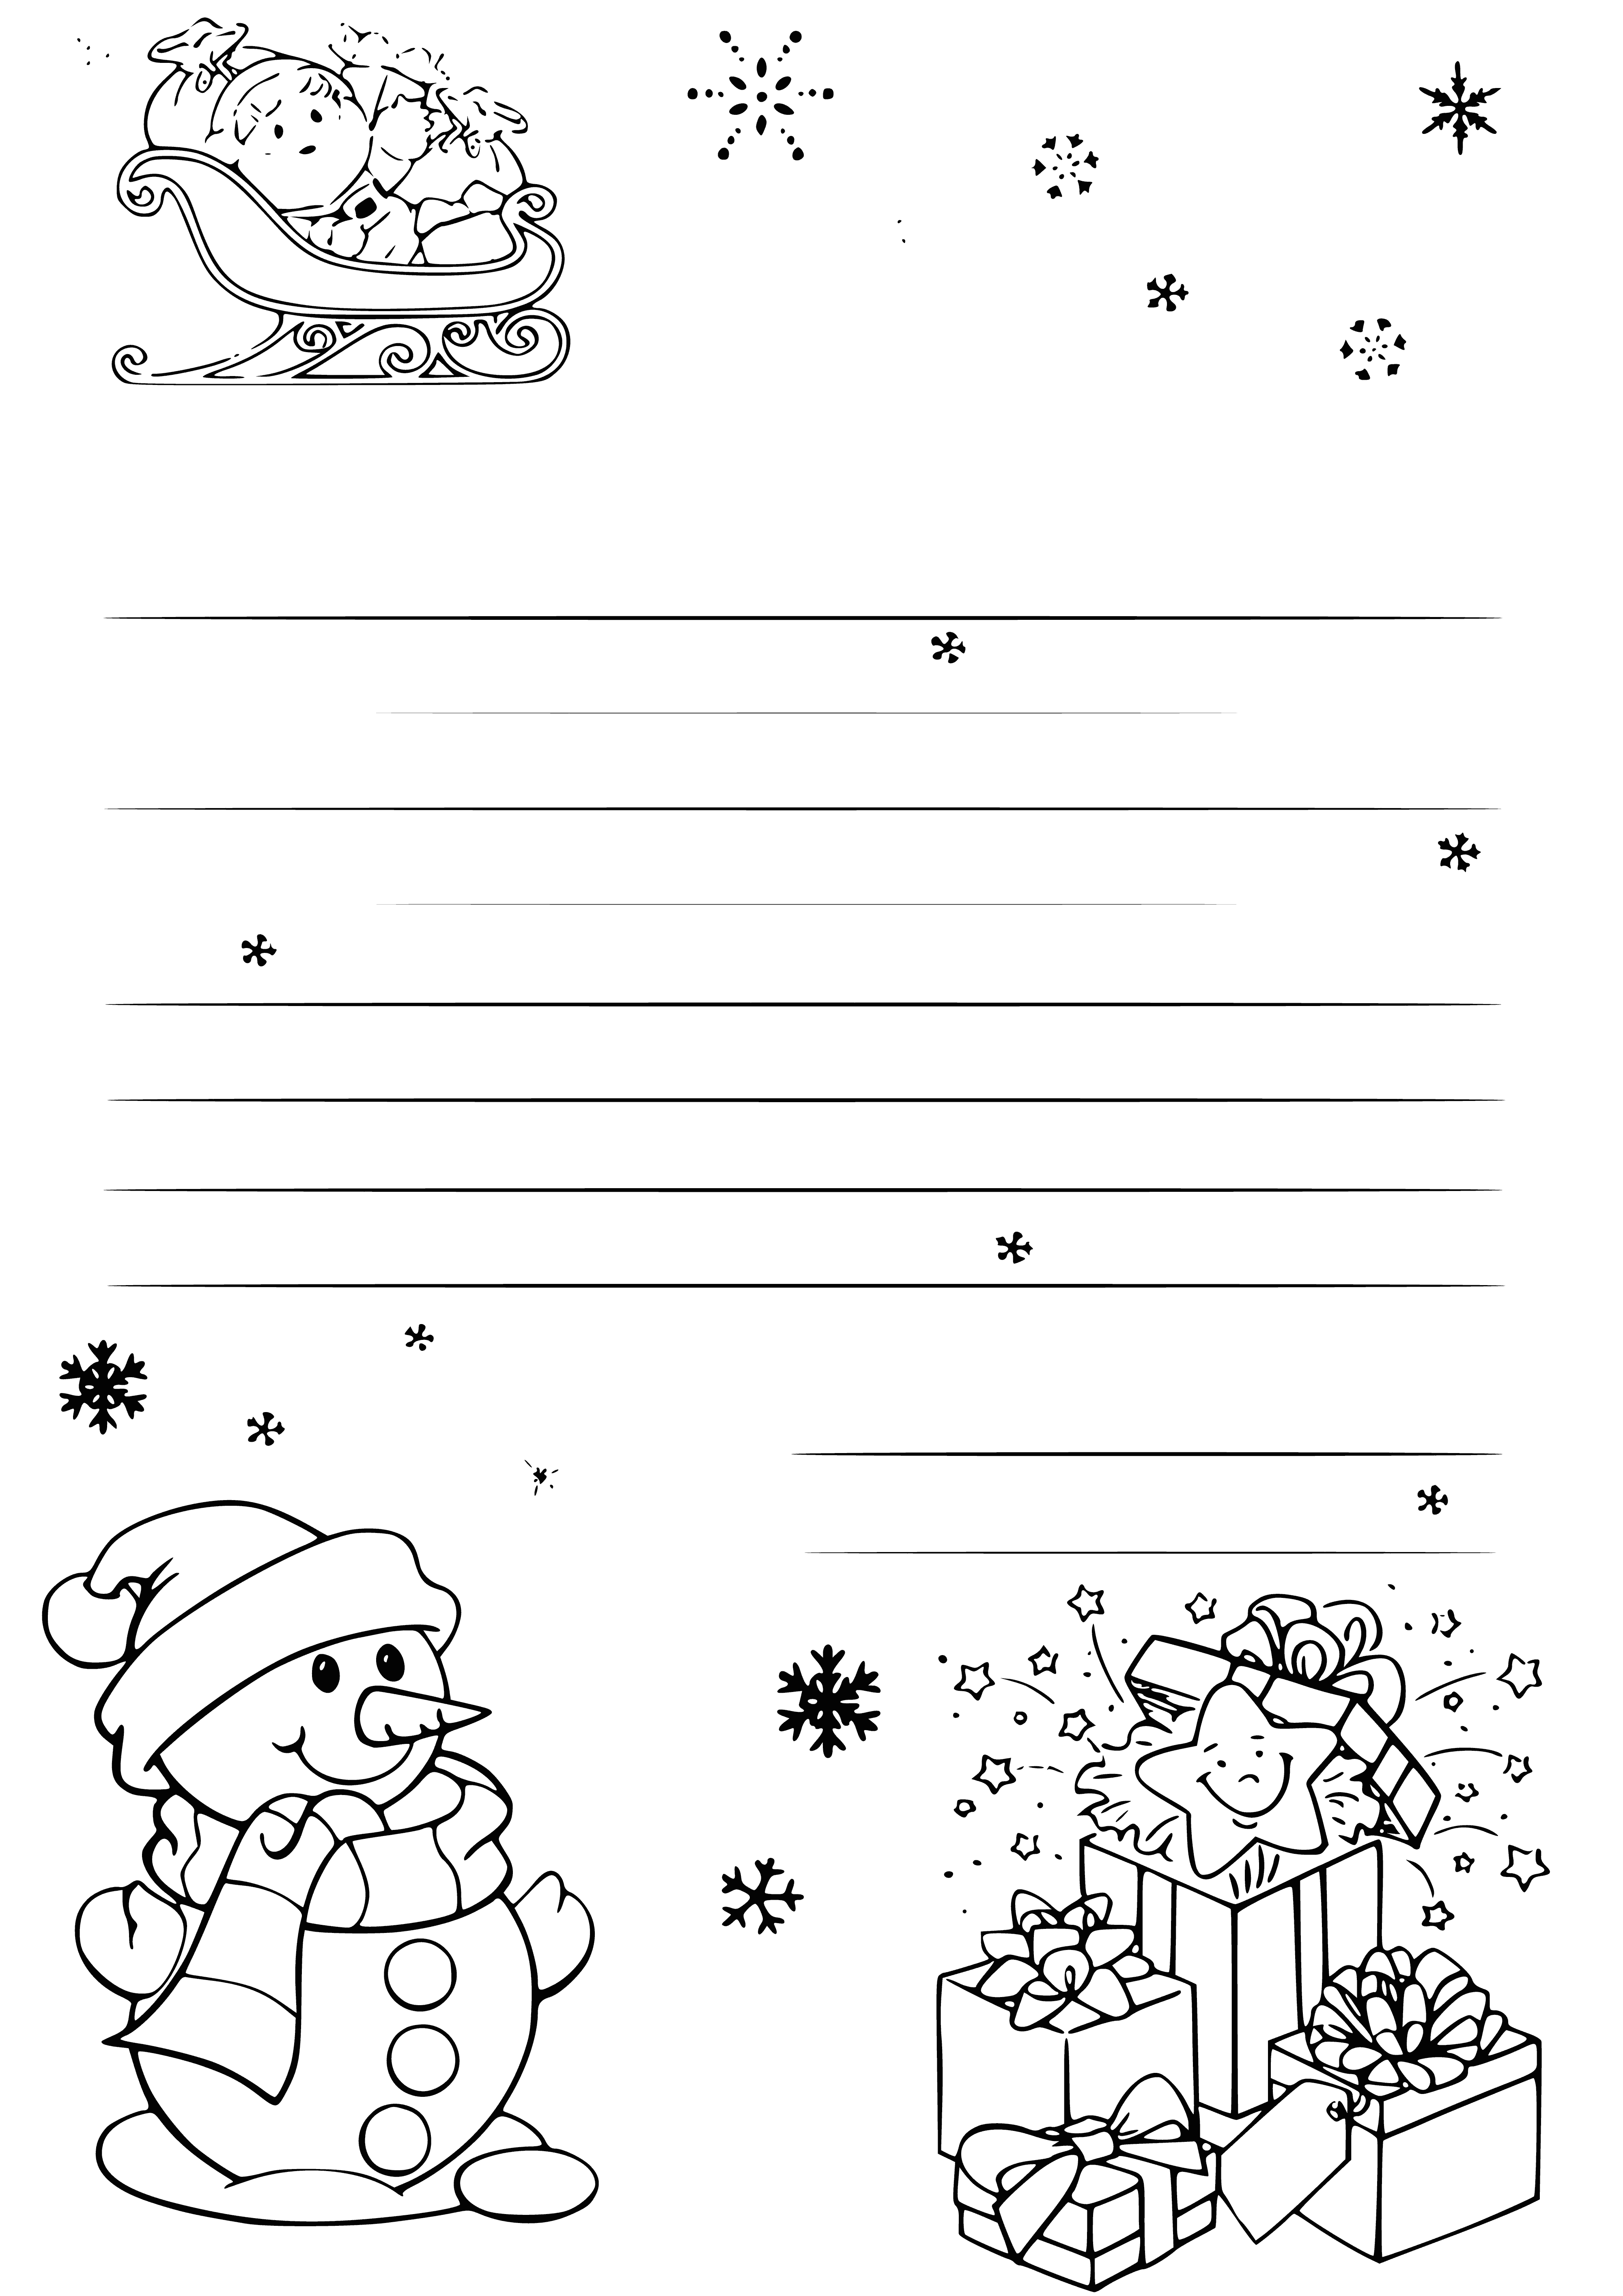 coloring page: on it.

Child writes letter to Santa, drawing Christmas tree and wishing him "lovely Christmas". #ChristmasSpirit